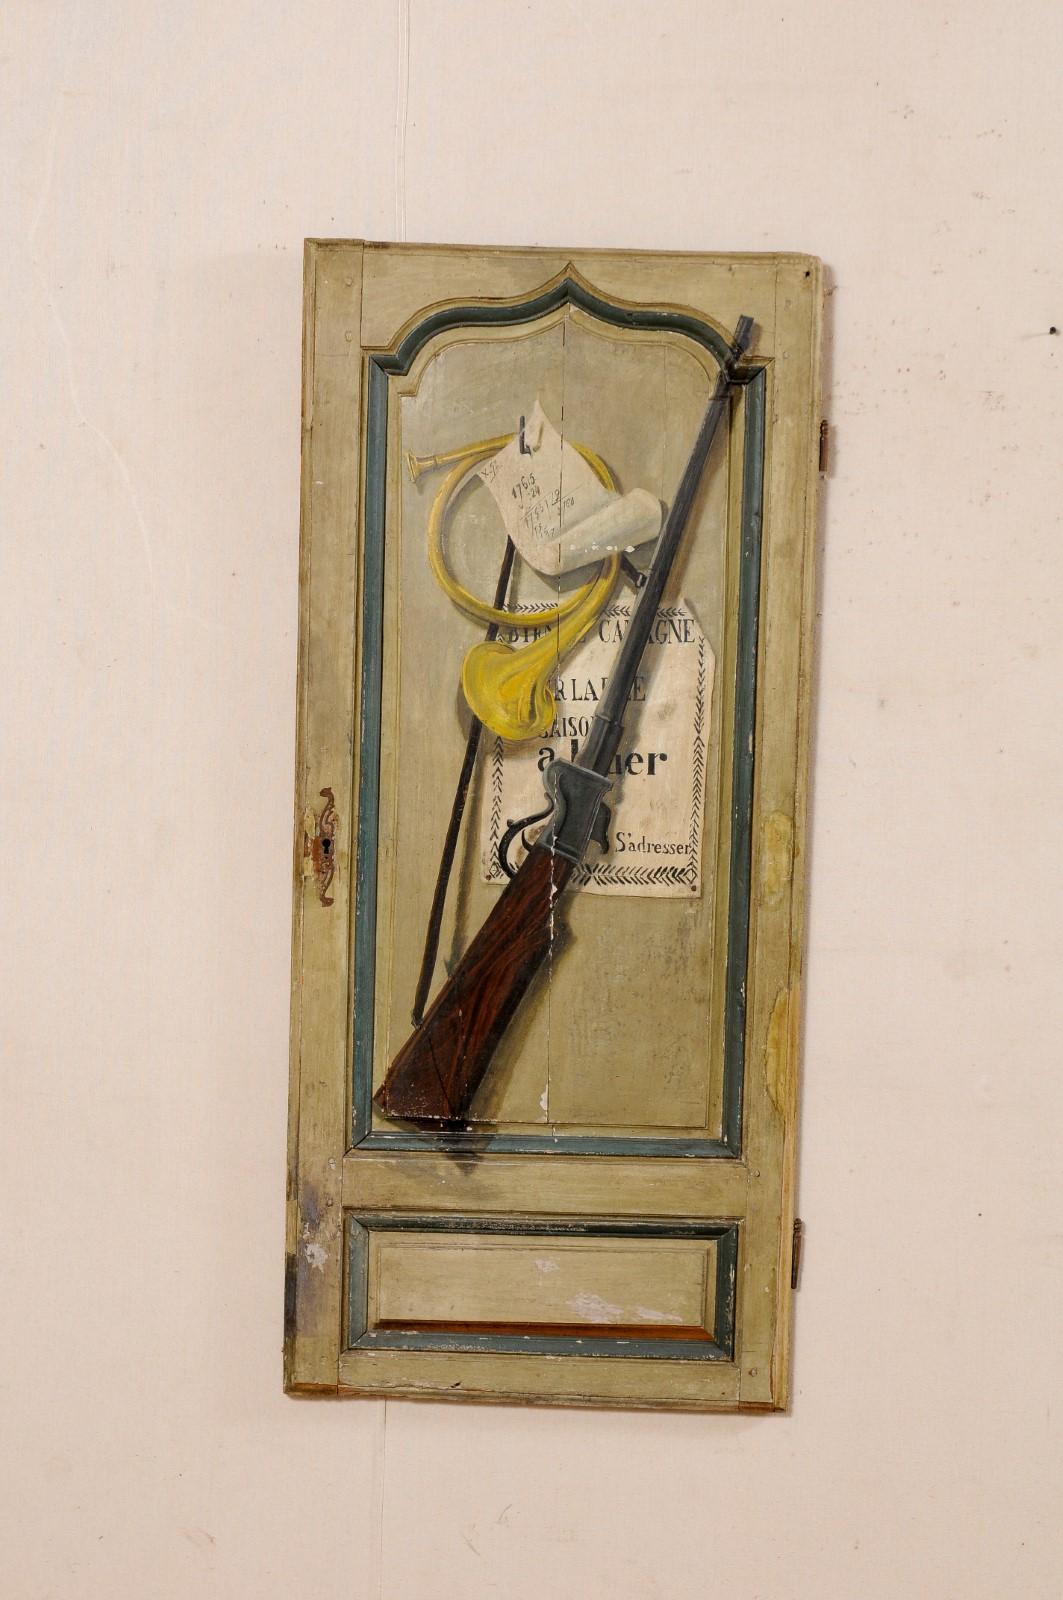 A French trompe l'oeil door from the 19th century. This single antique door from France, with its shorter 4.5 foot (approximate) height, features a trompe l'oeil painted finish is a hunters motif (complete with French horn and riffle). The raised